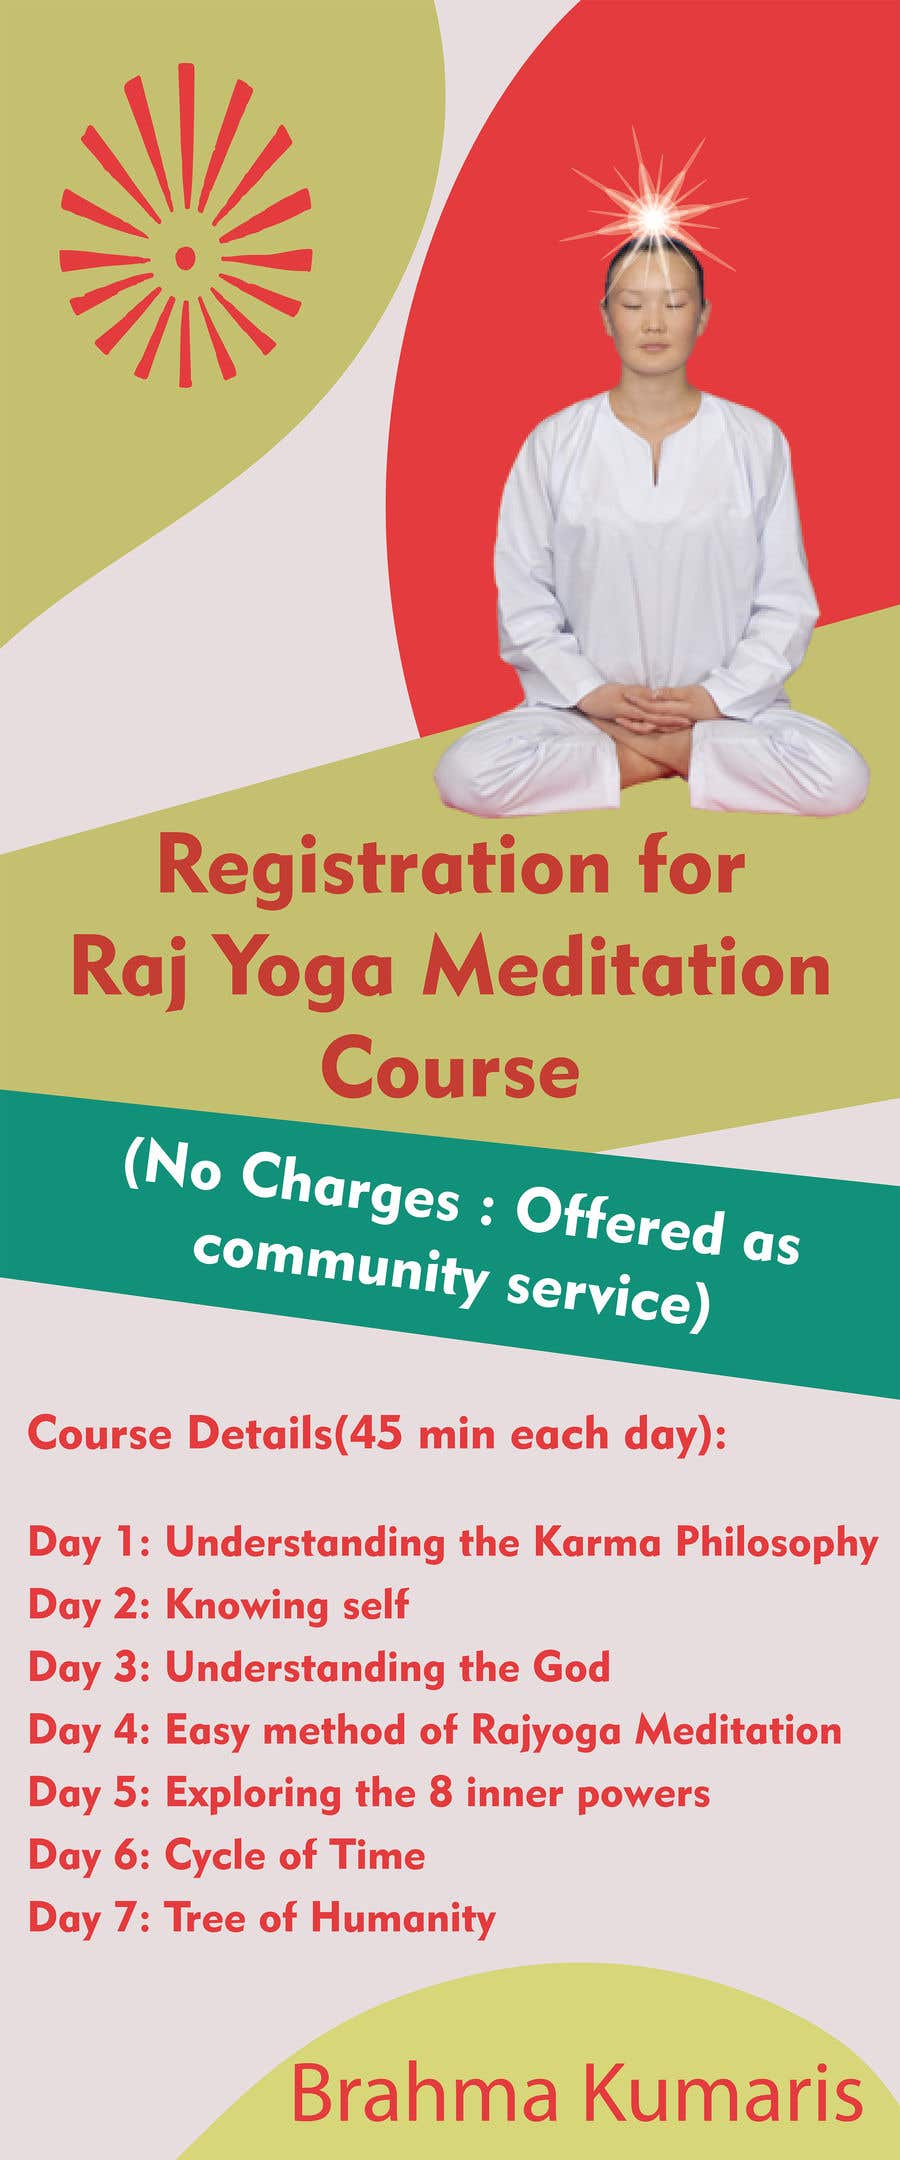 Contest Entry #5 for                                                 Standee design for meditation course registration
                                            